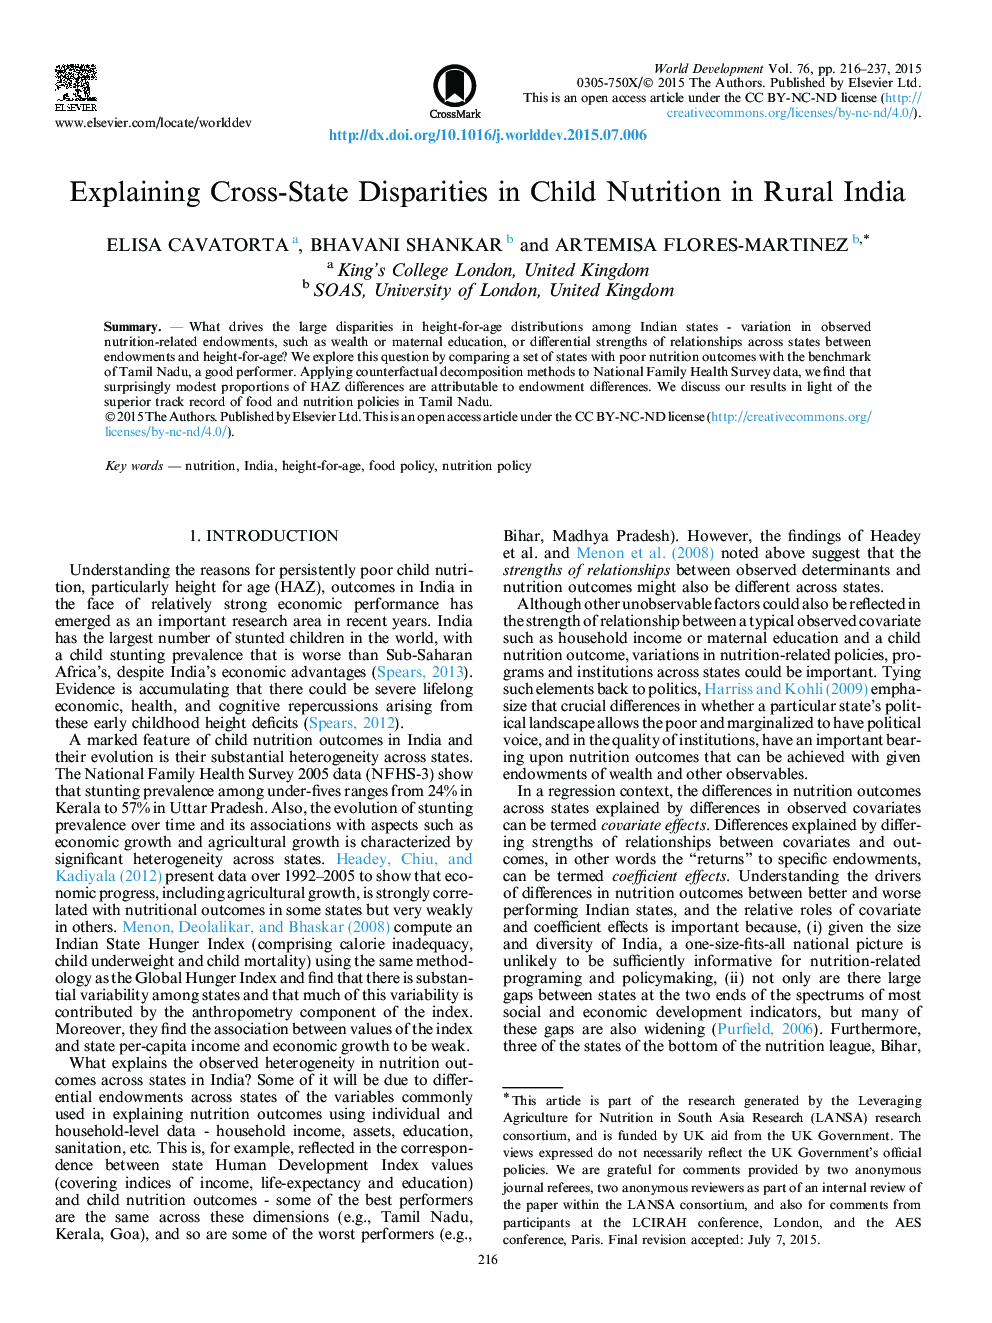 Explaining Cross-State Disparities in Child Nutrition in Rural India